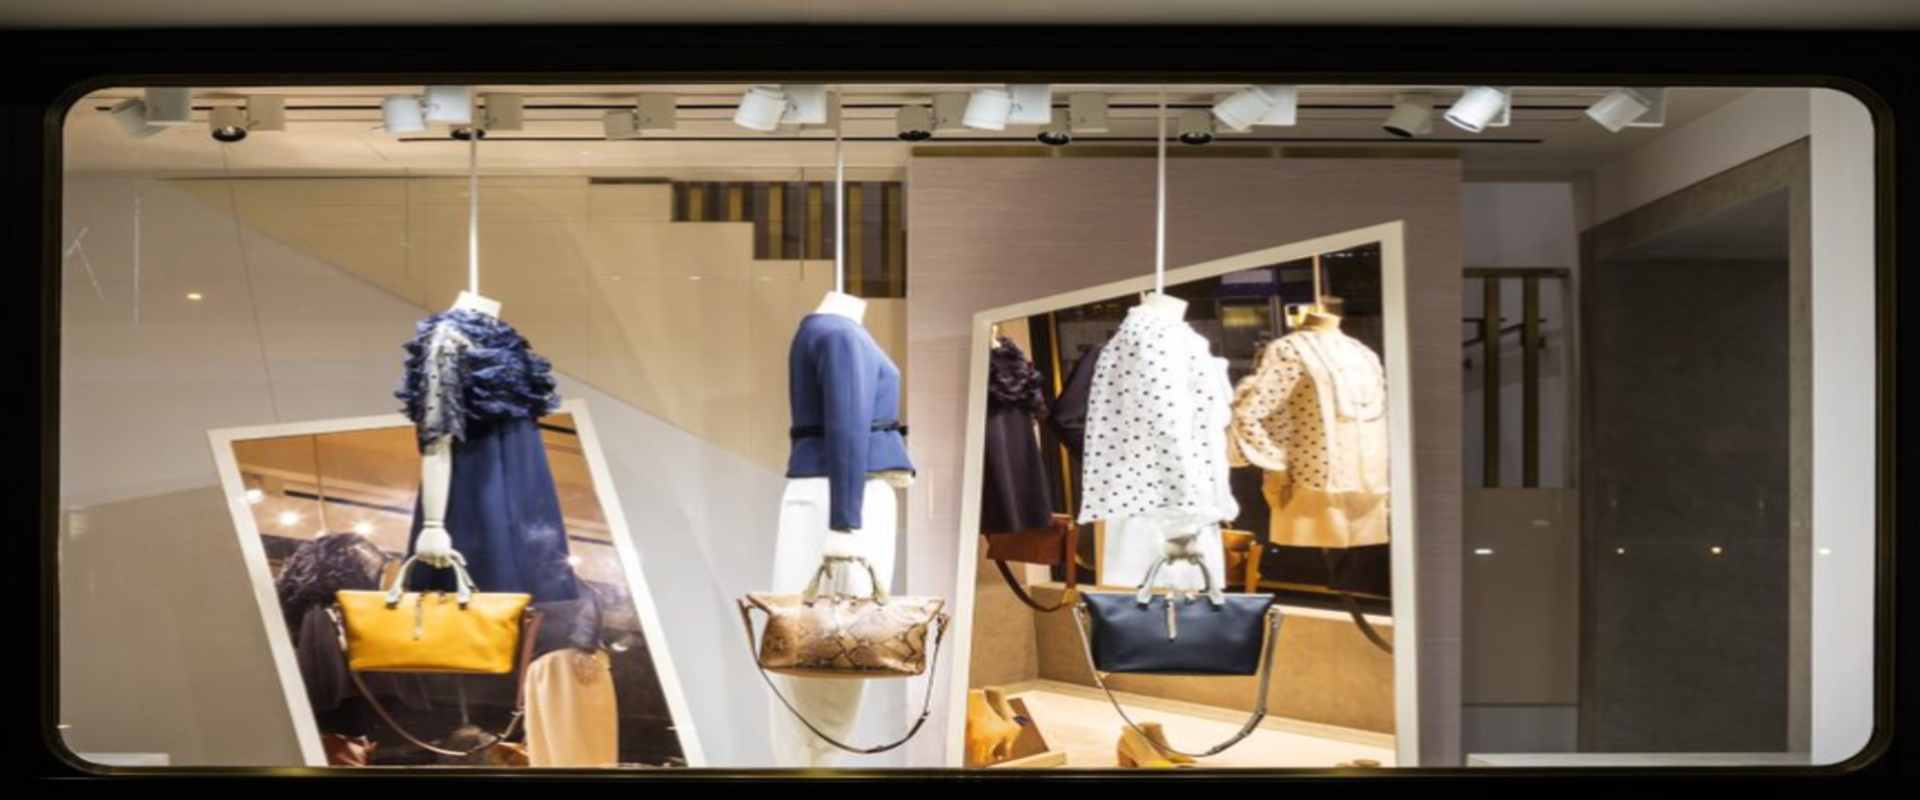 The three most important things about visual merchandising